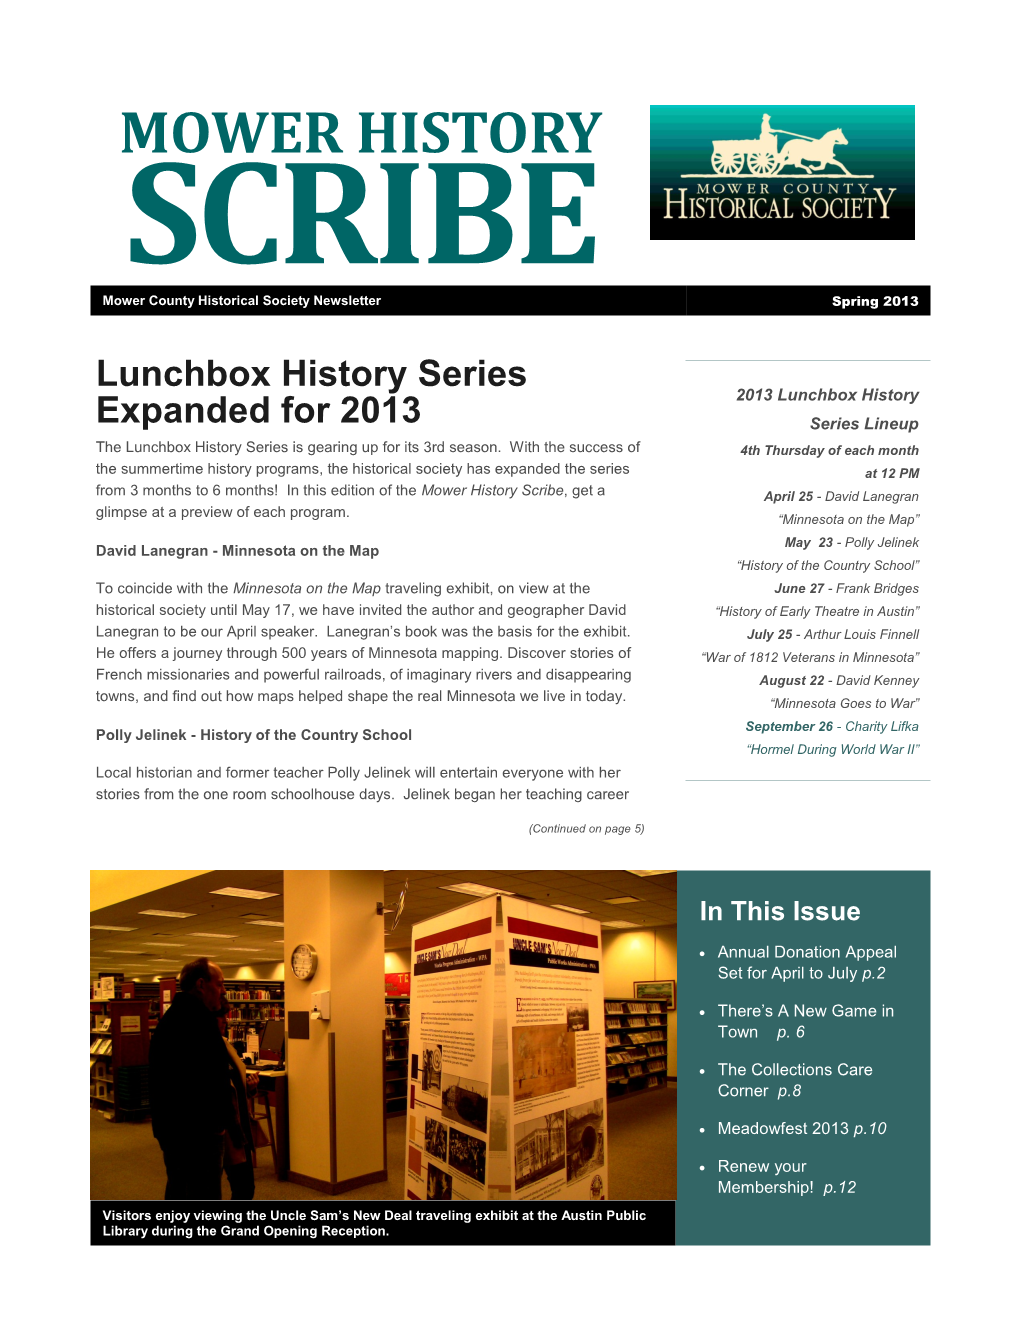 MOWER HISTORY SCRIBE Mower County Historical Society Newsletter Spring 2013